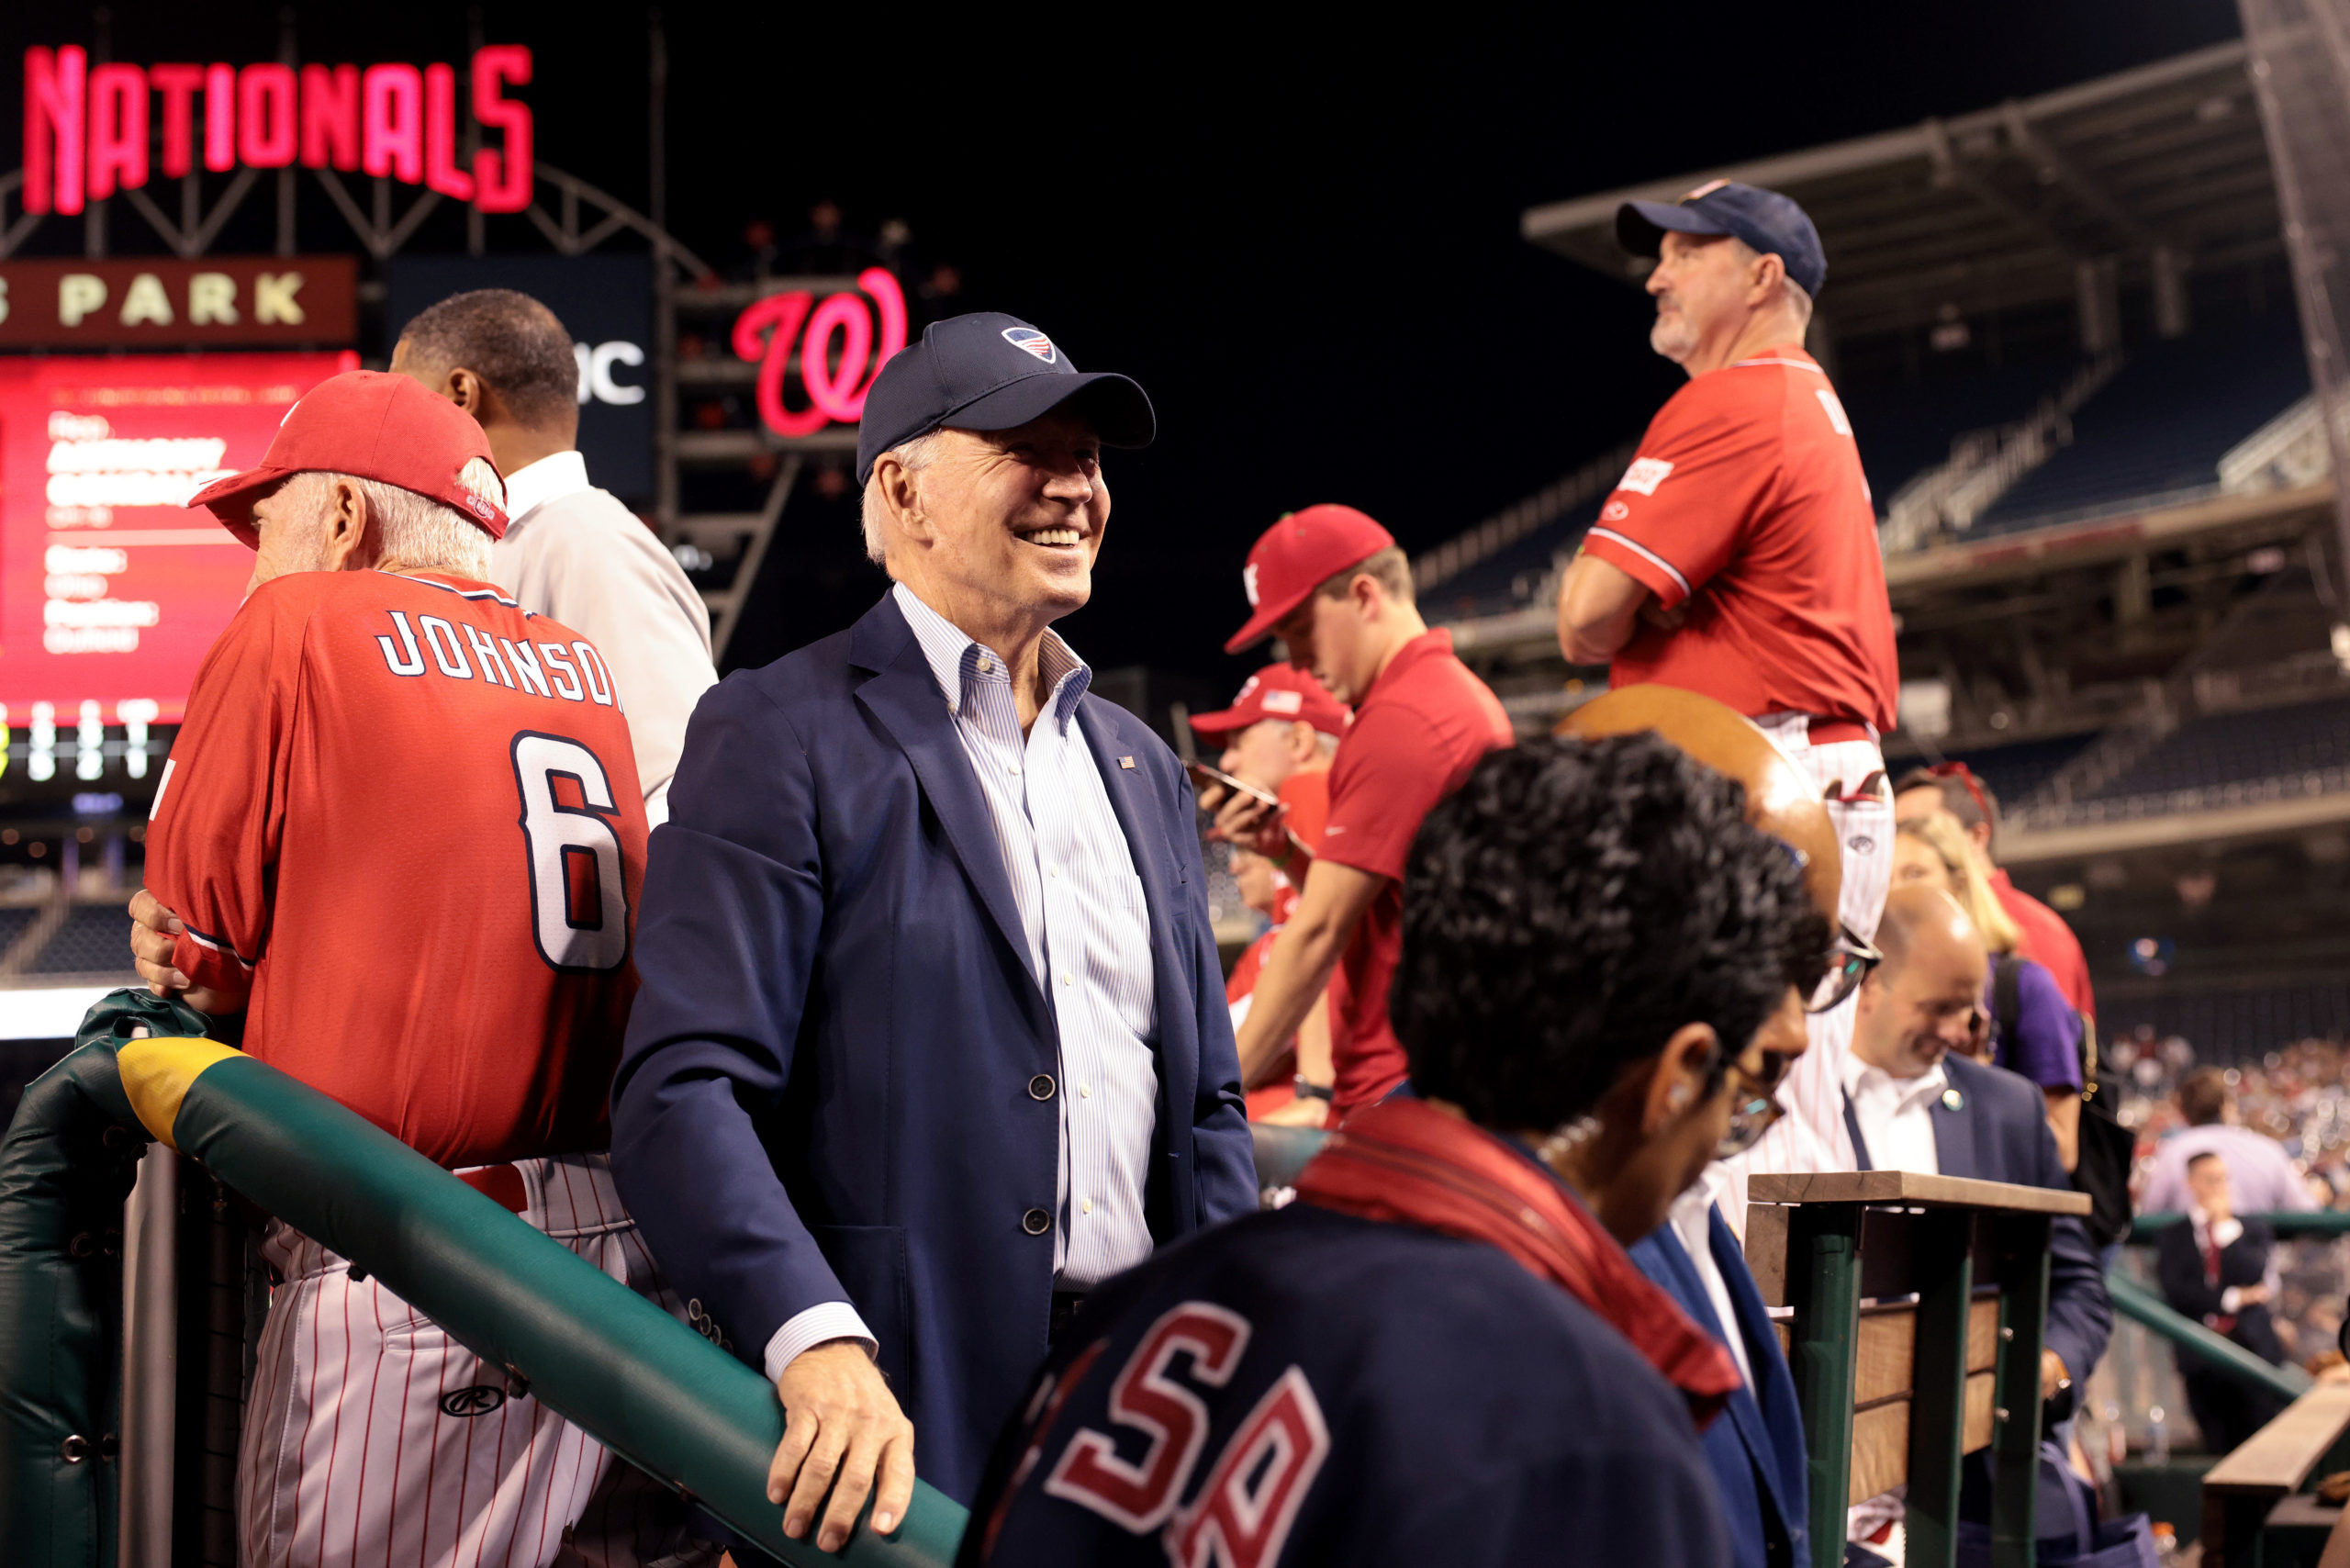 President Joe Biden visits the Republican dugout during the Congressional baseball game at Nationals Park on Wednesday. (Win McNamee/Getty Images)